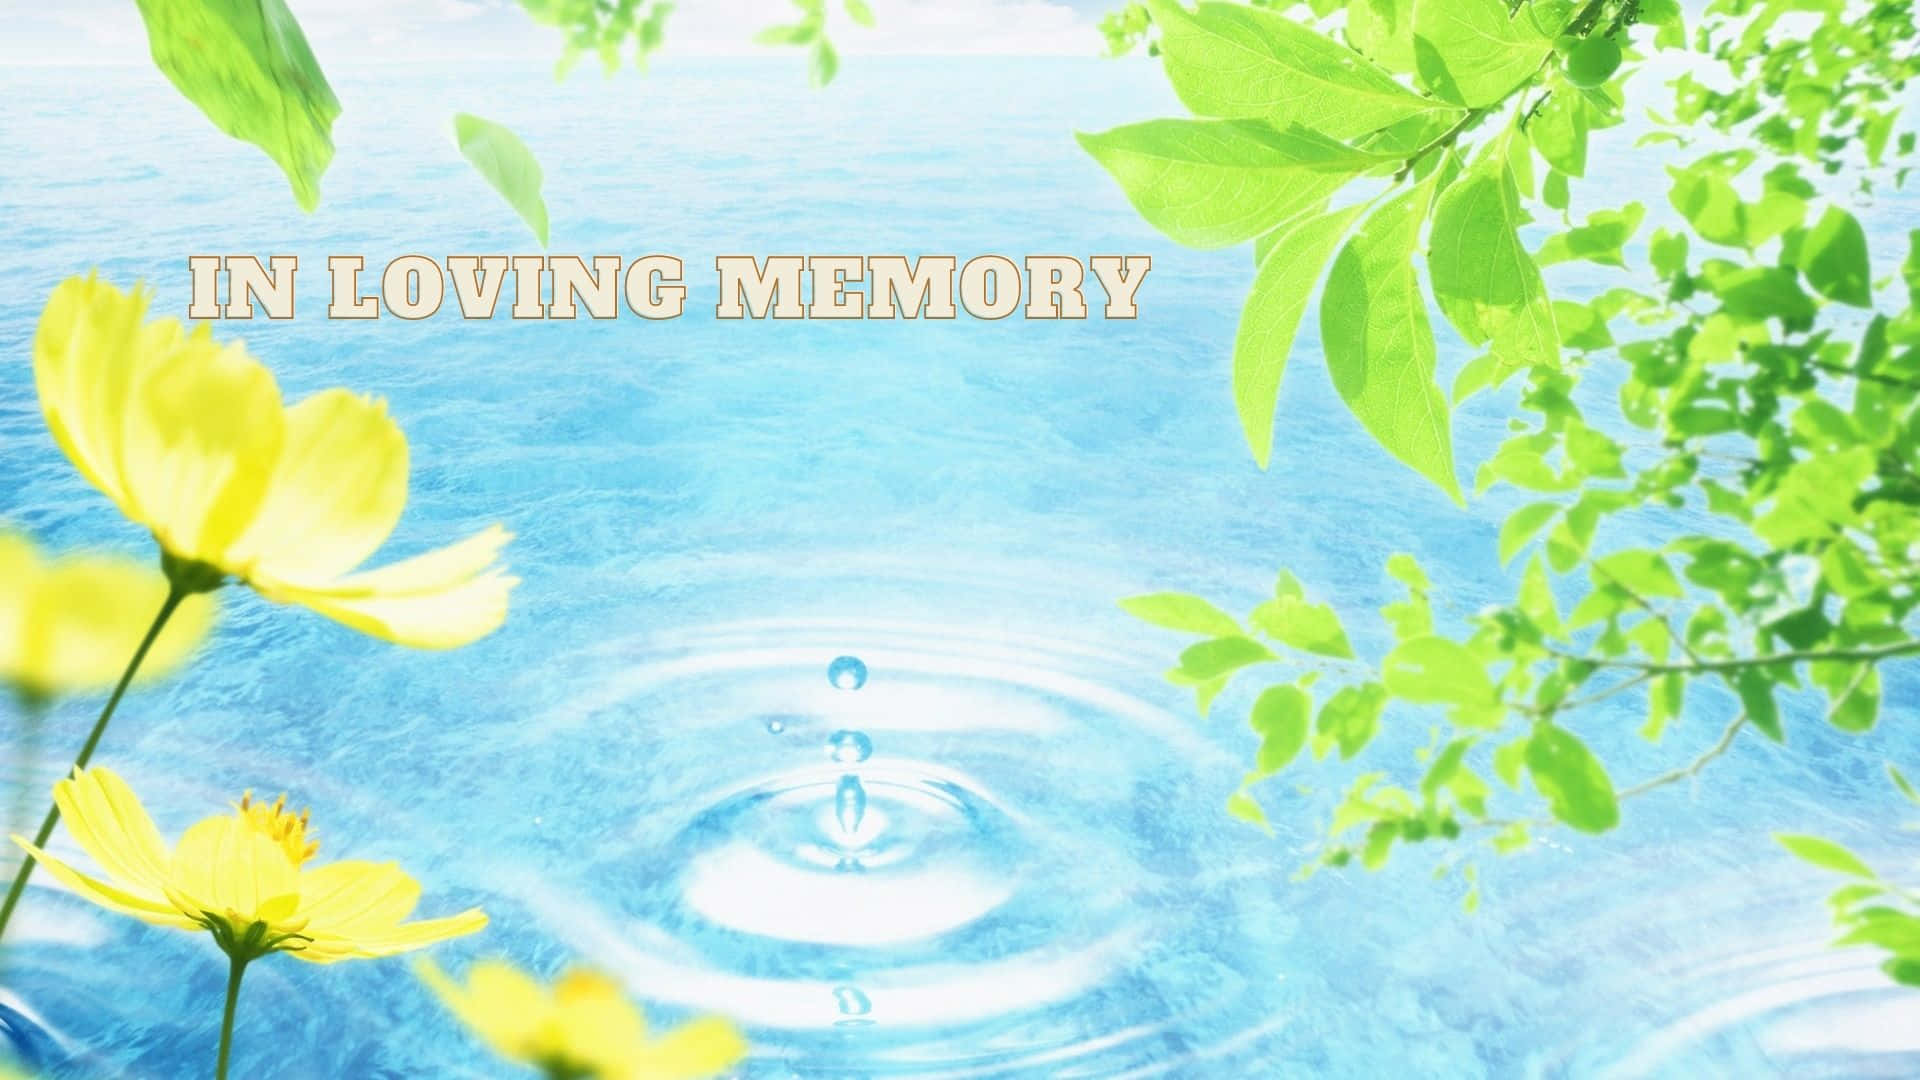 Water Droplet In Loving Memory Background